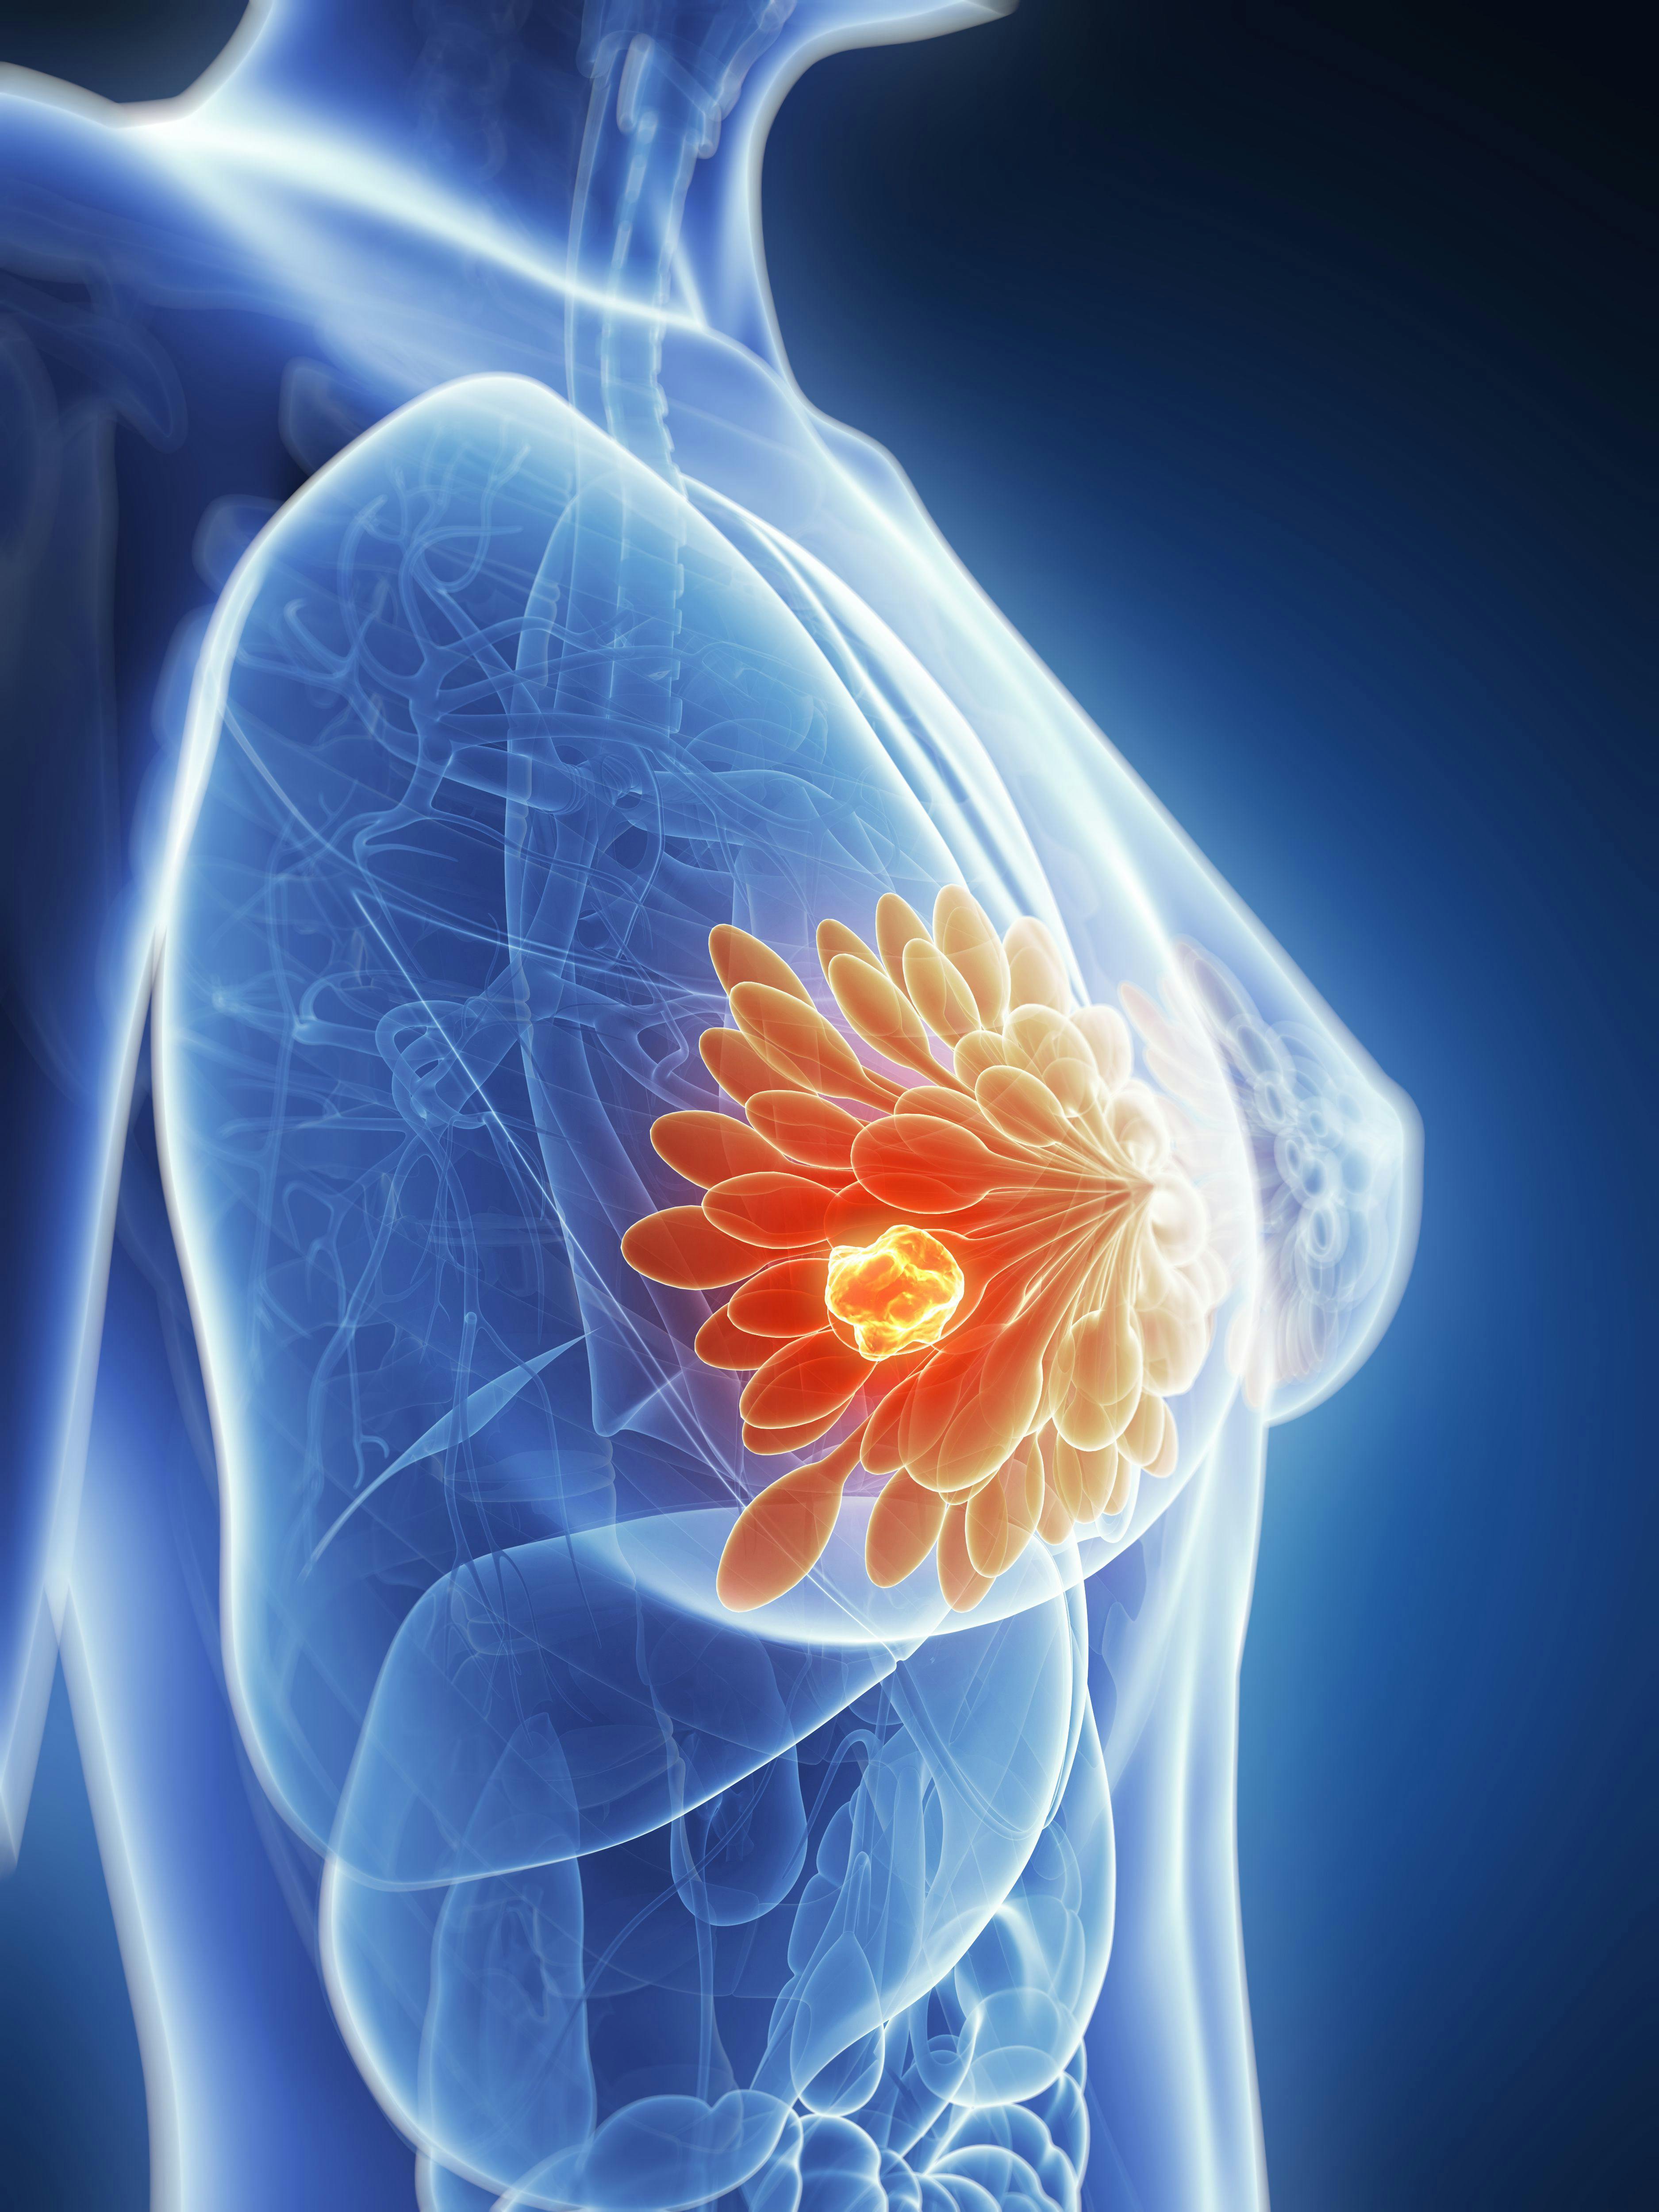 Patients with estrogen receptor–positive, HER2-negative advanced or metastatic breast cancer experienced a progression-free survival benefit after being treated with elacestrant.